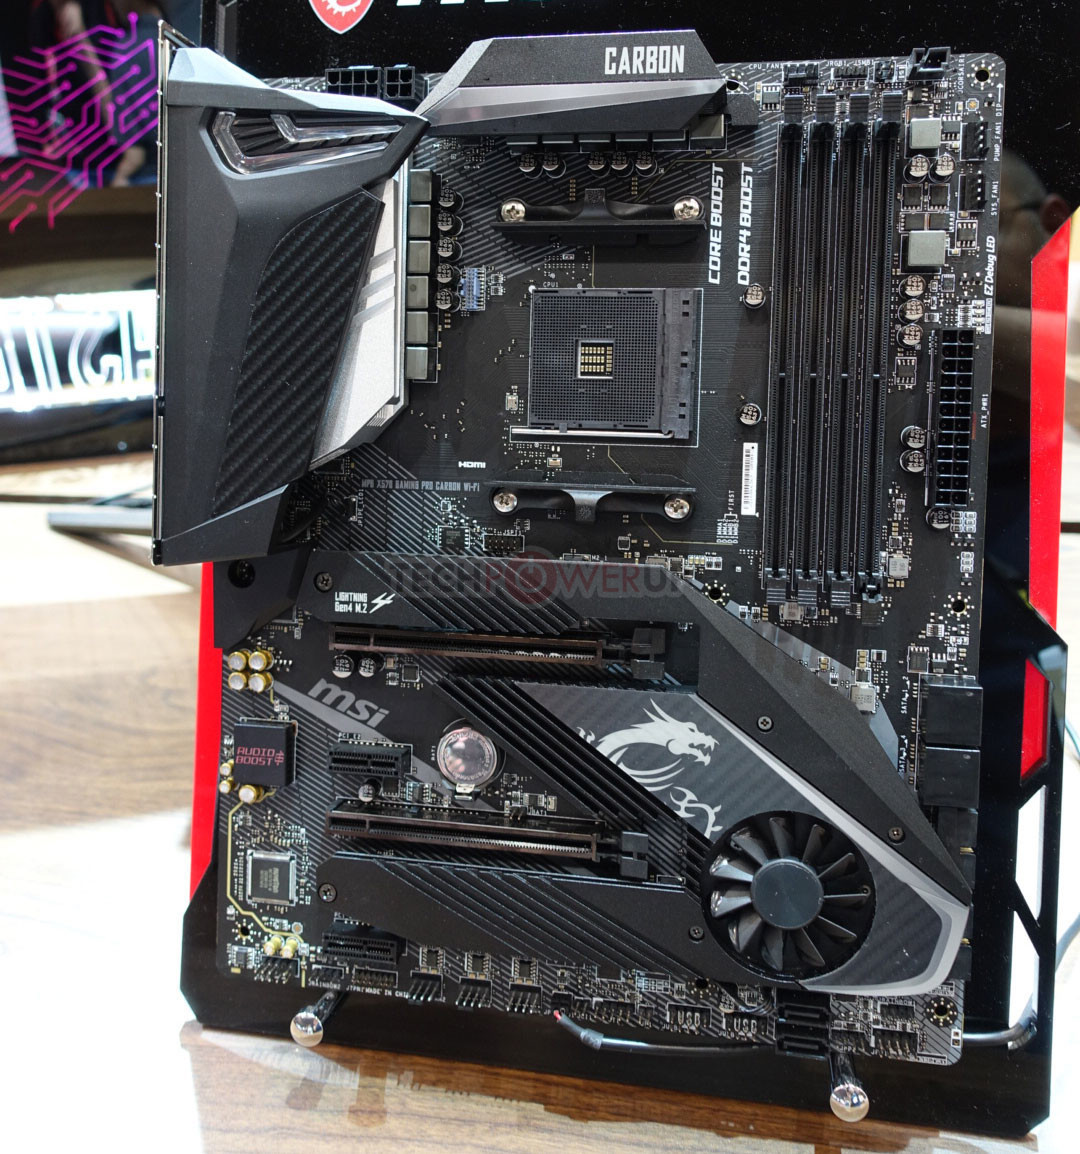 Introducing MSI MPG B550 Motherboards - PC Perspective